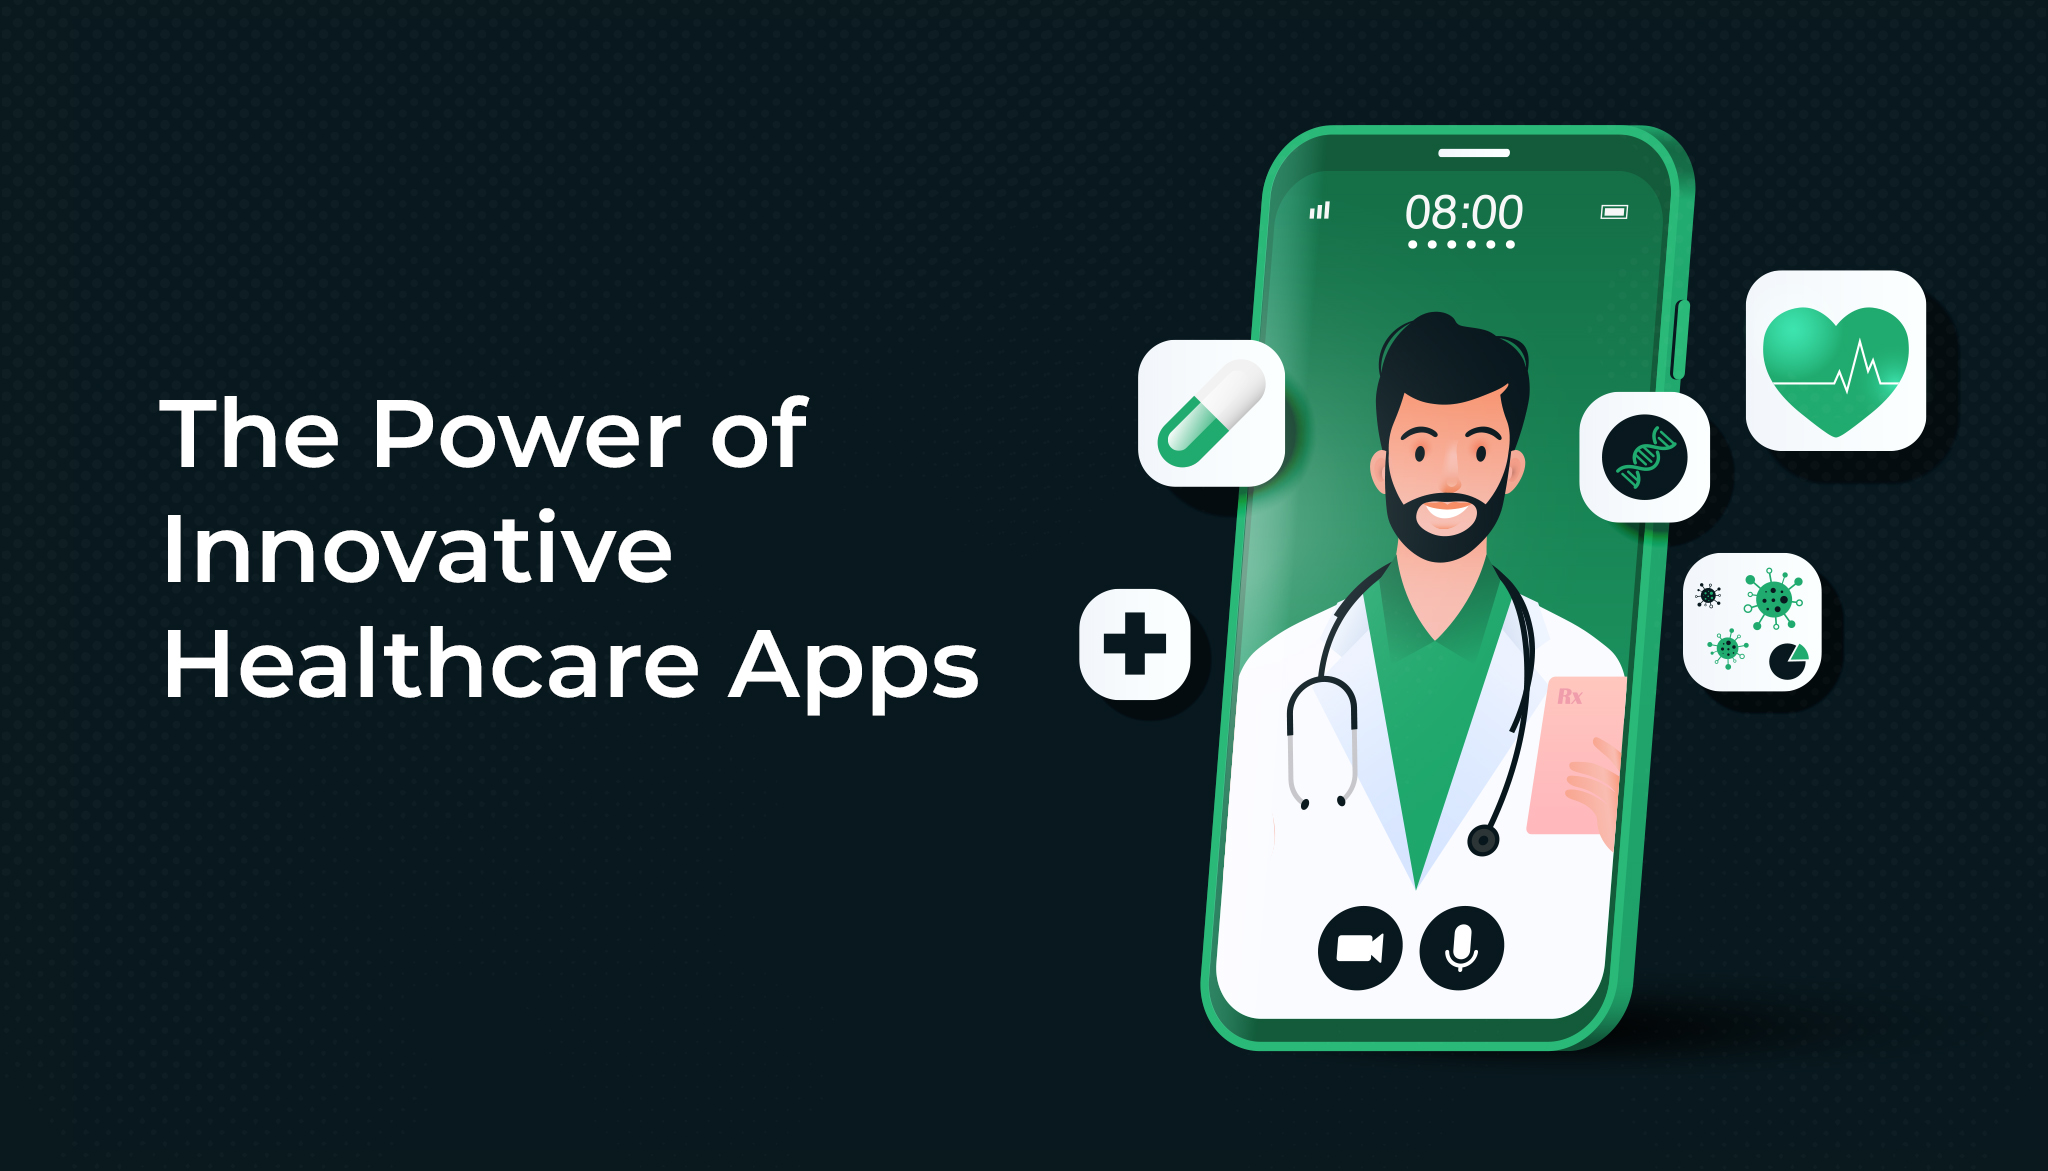 The Power of Innovative Healthcare Apps